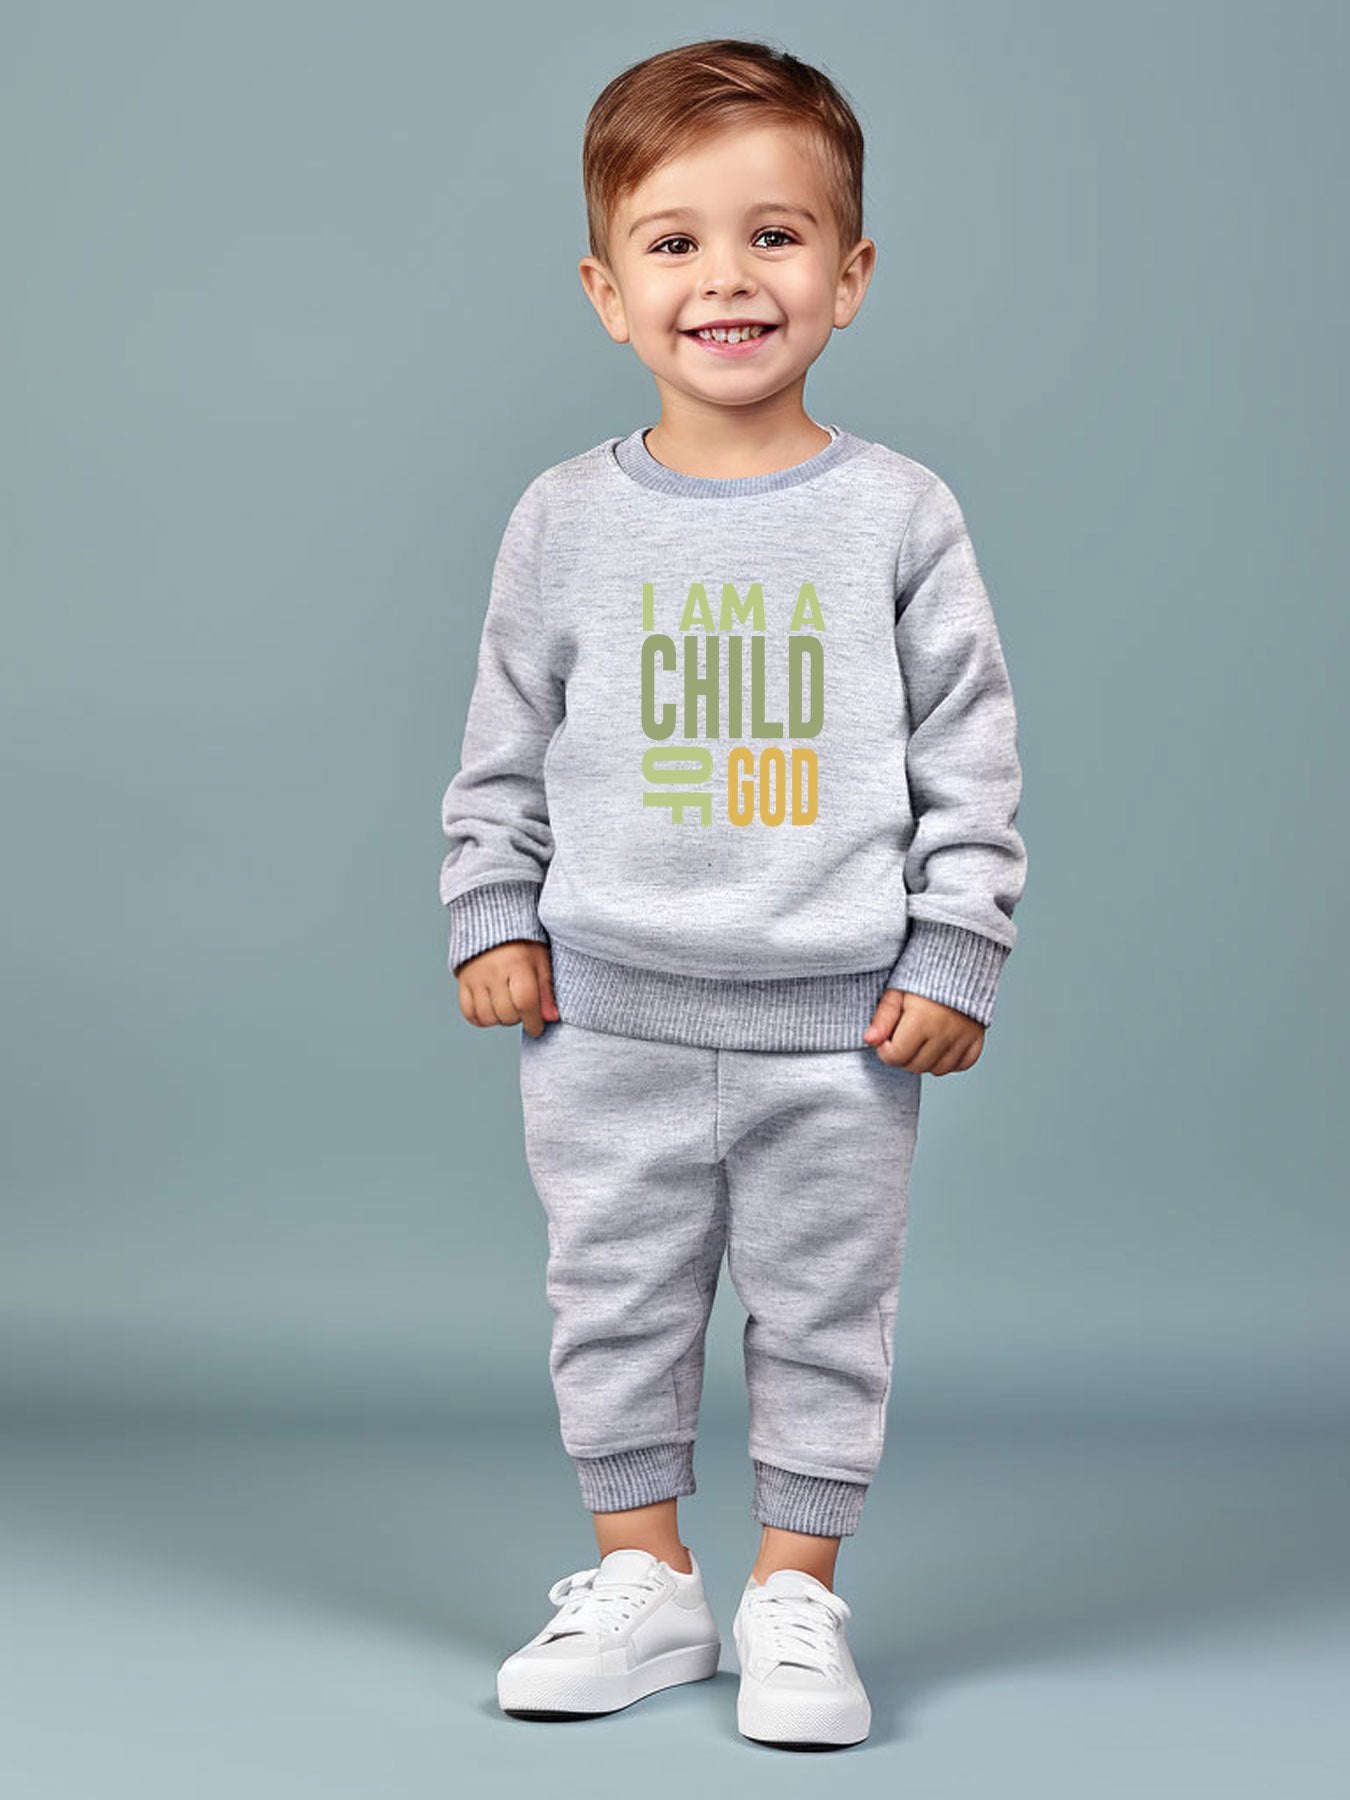 I AM A CHILD OF GOD Youth Christian Casual Outfit claimedbygoddesigns